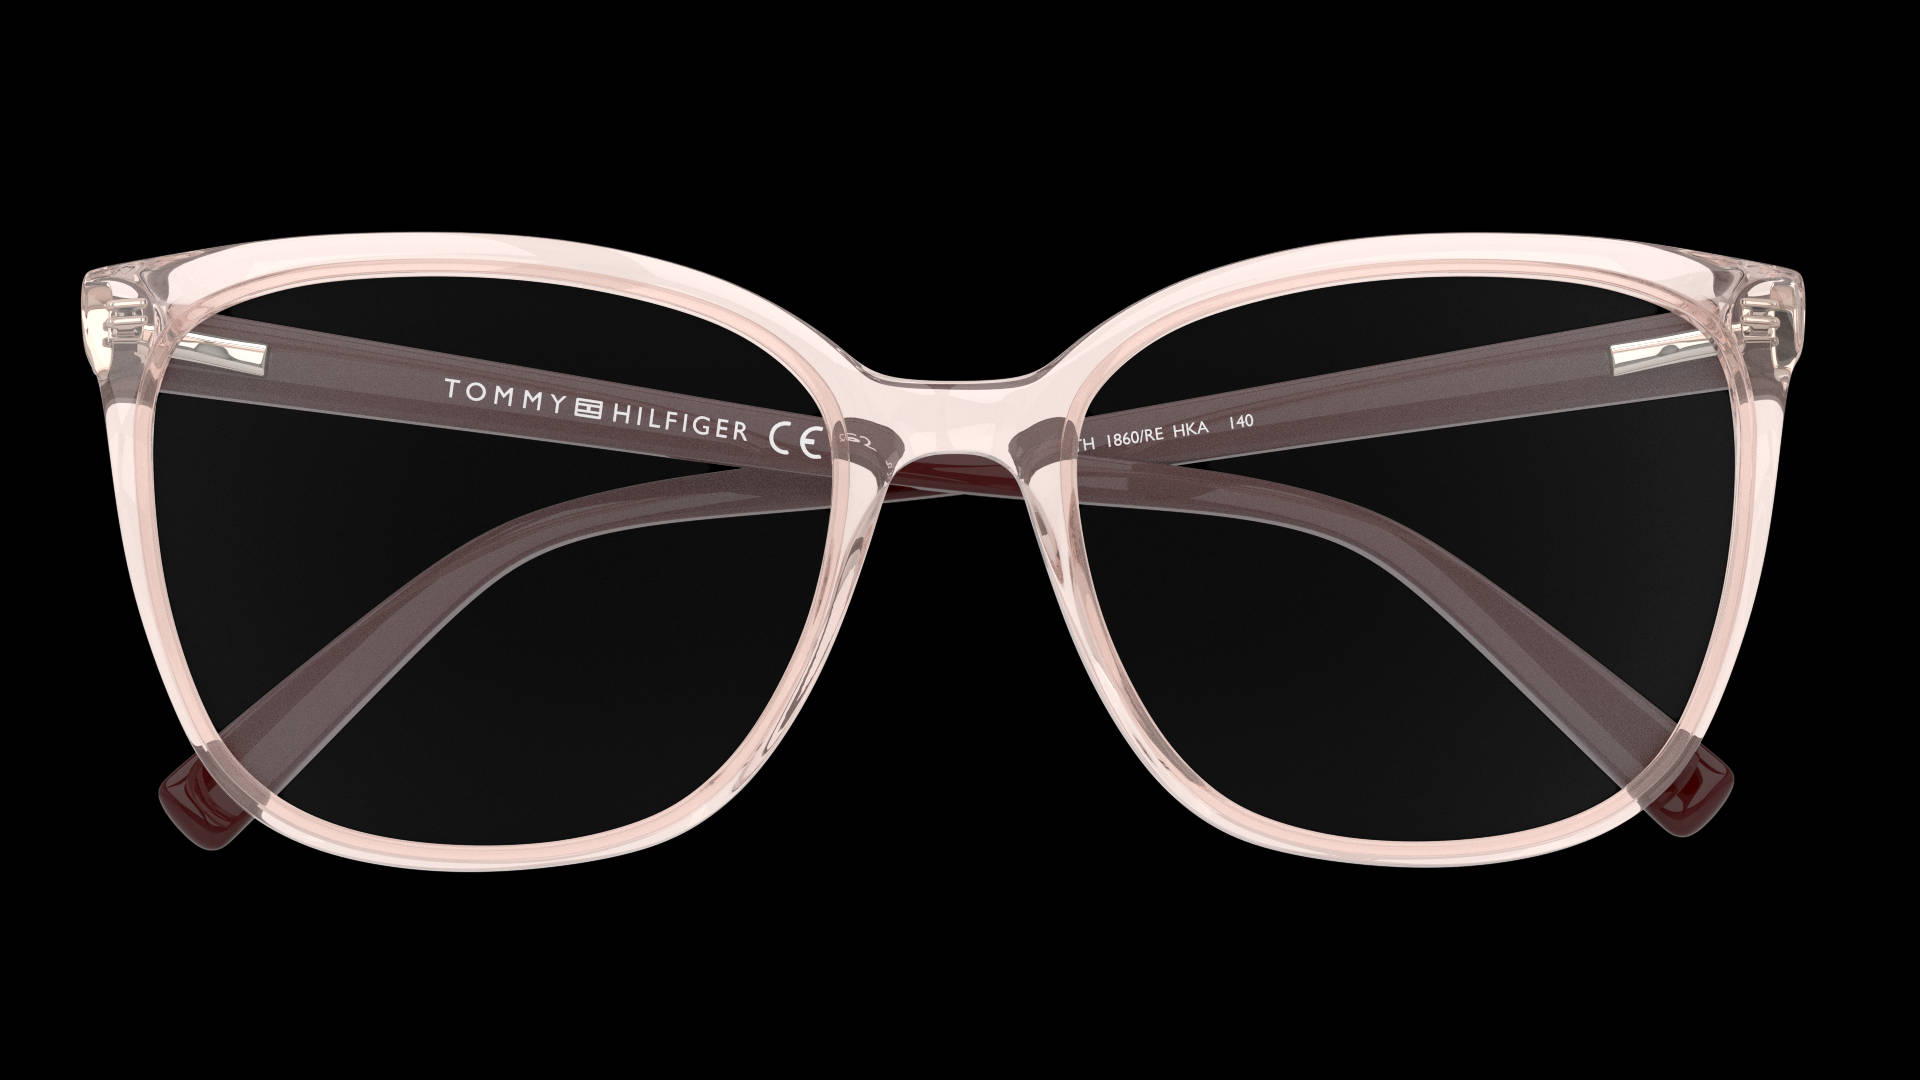 Tommy Hilfiger Bio-based Th 1860/re Women's Glasses Background